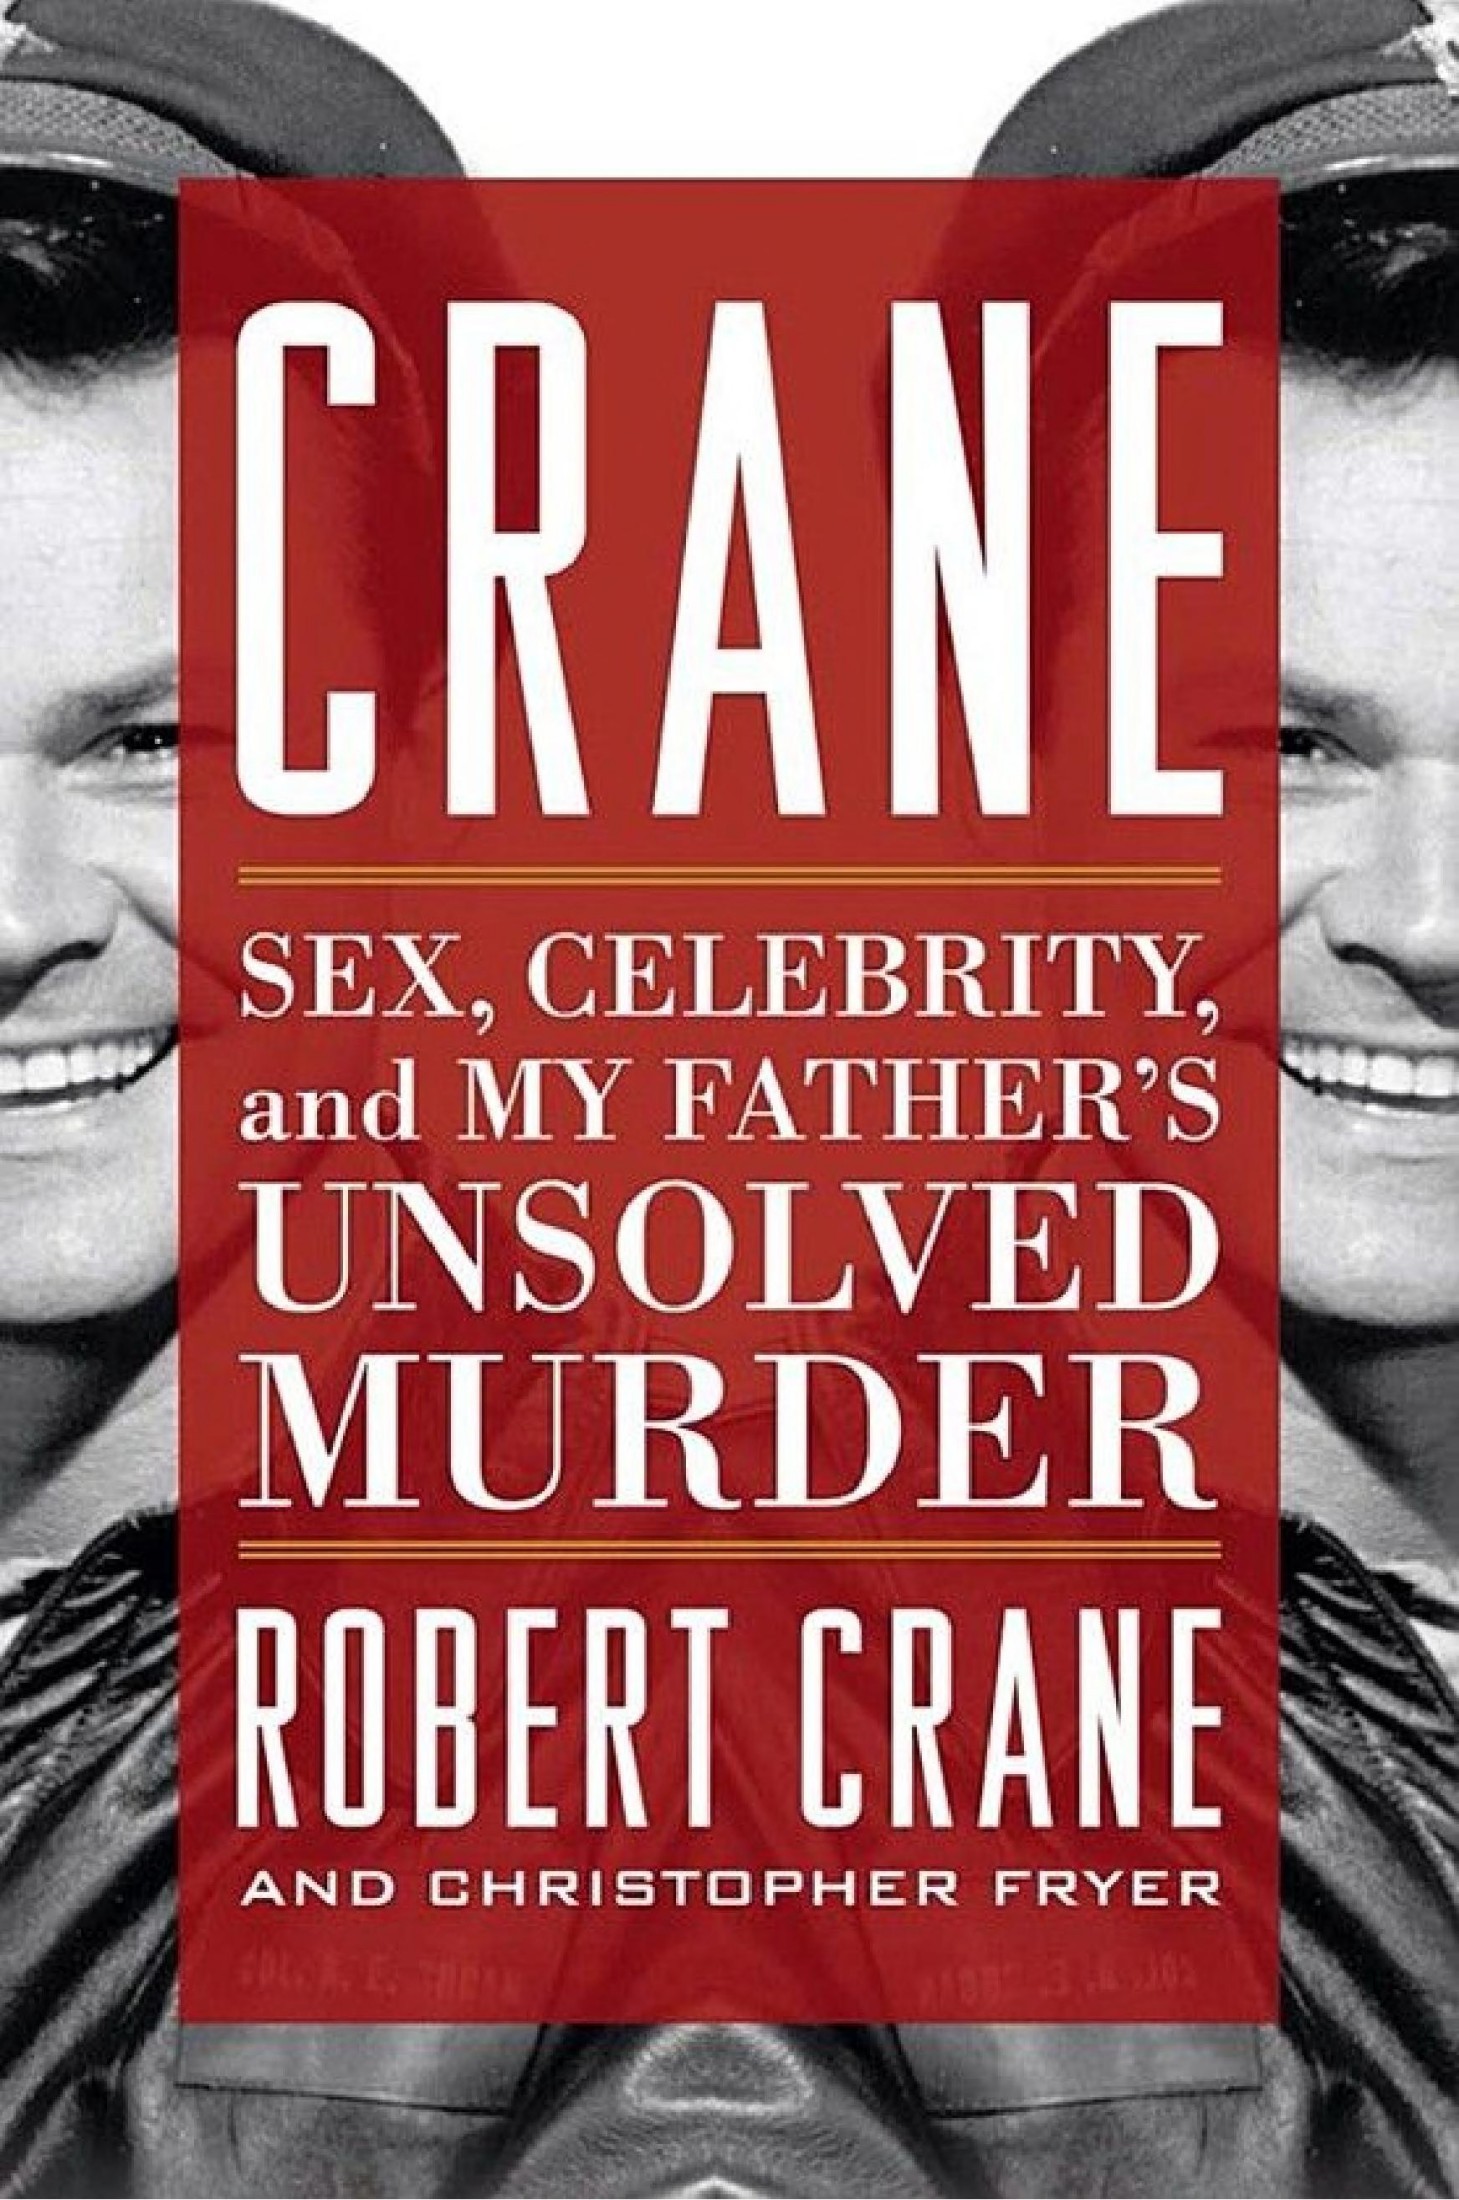 CRANE CRANE SEX CELEBRITY and MY FATHERS UNSOLVED MURDER ROBERT CRANE AND - photo 1